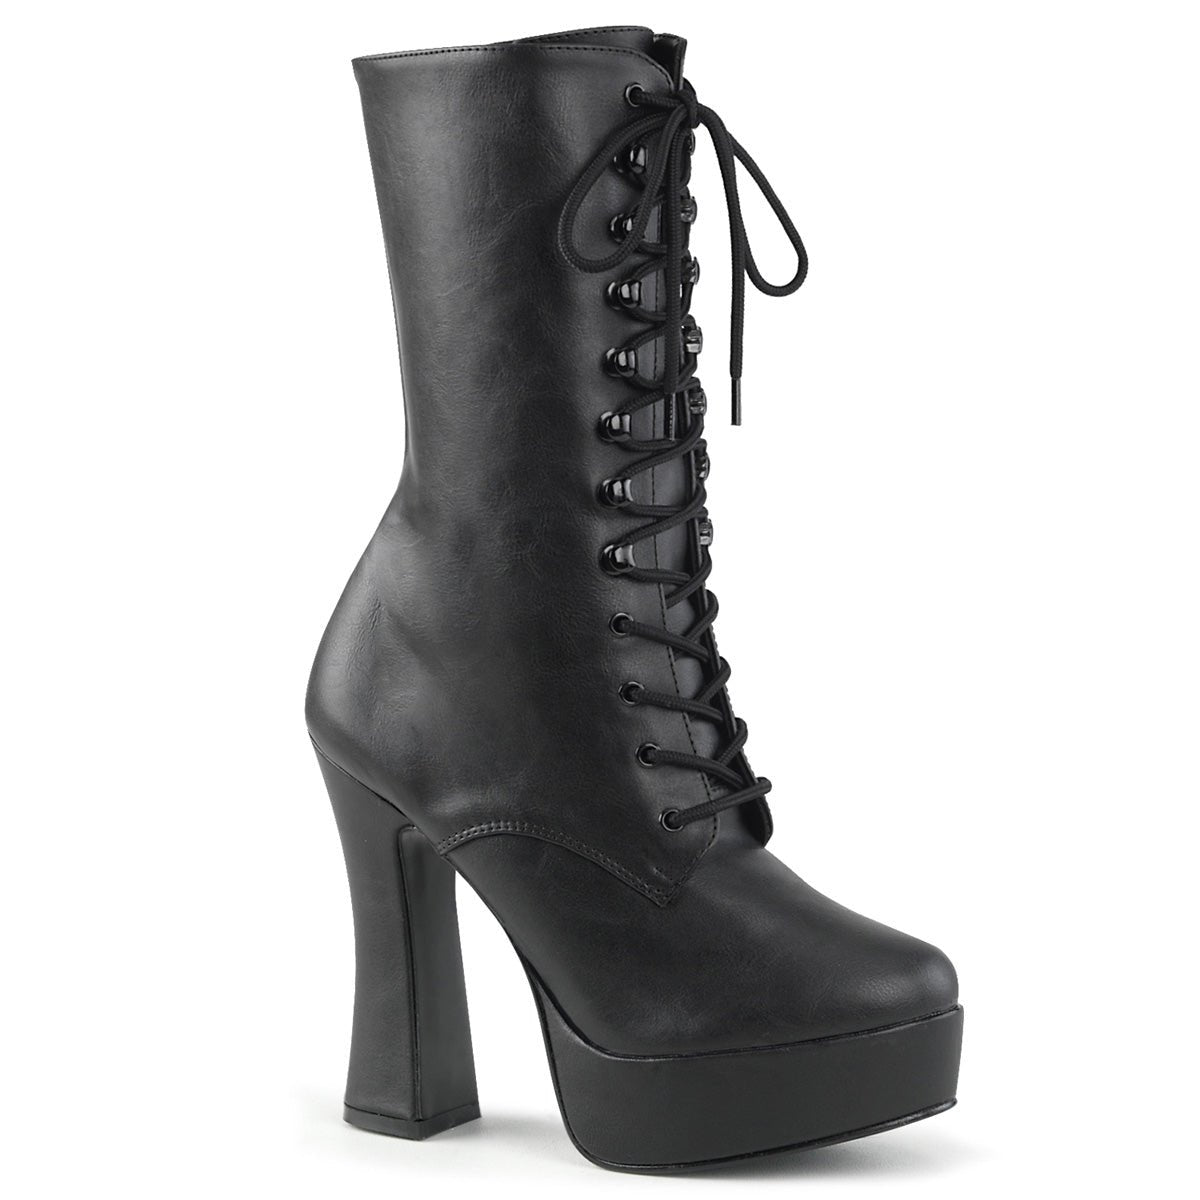 Clearance Pleaser Electra 1020 Black Matt Size 3UK/6USA - From Clearance Sold By Alternative Footwear